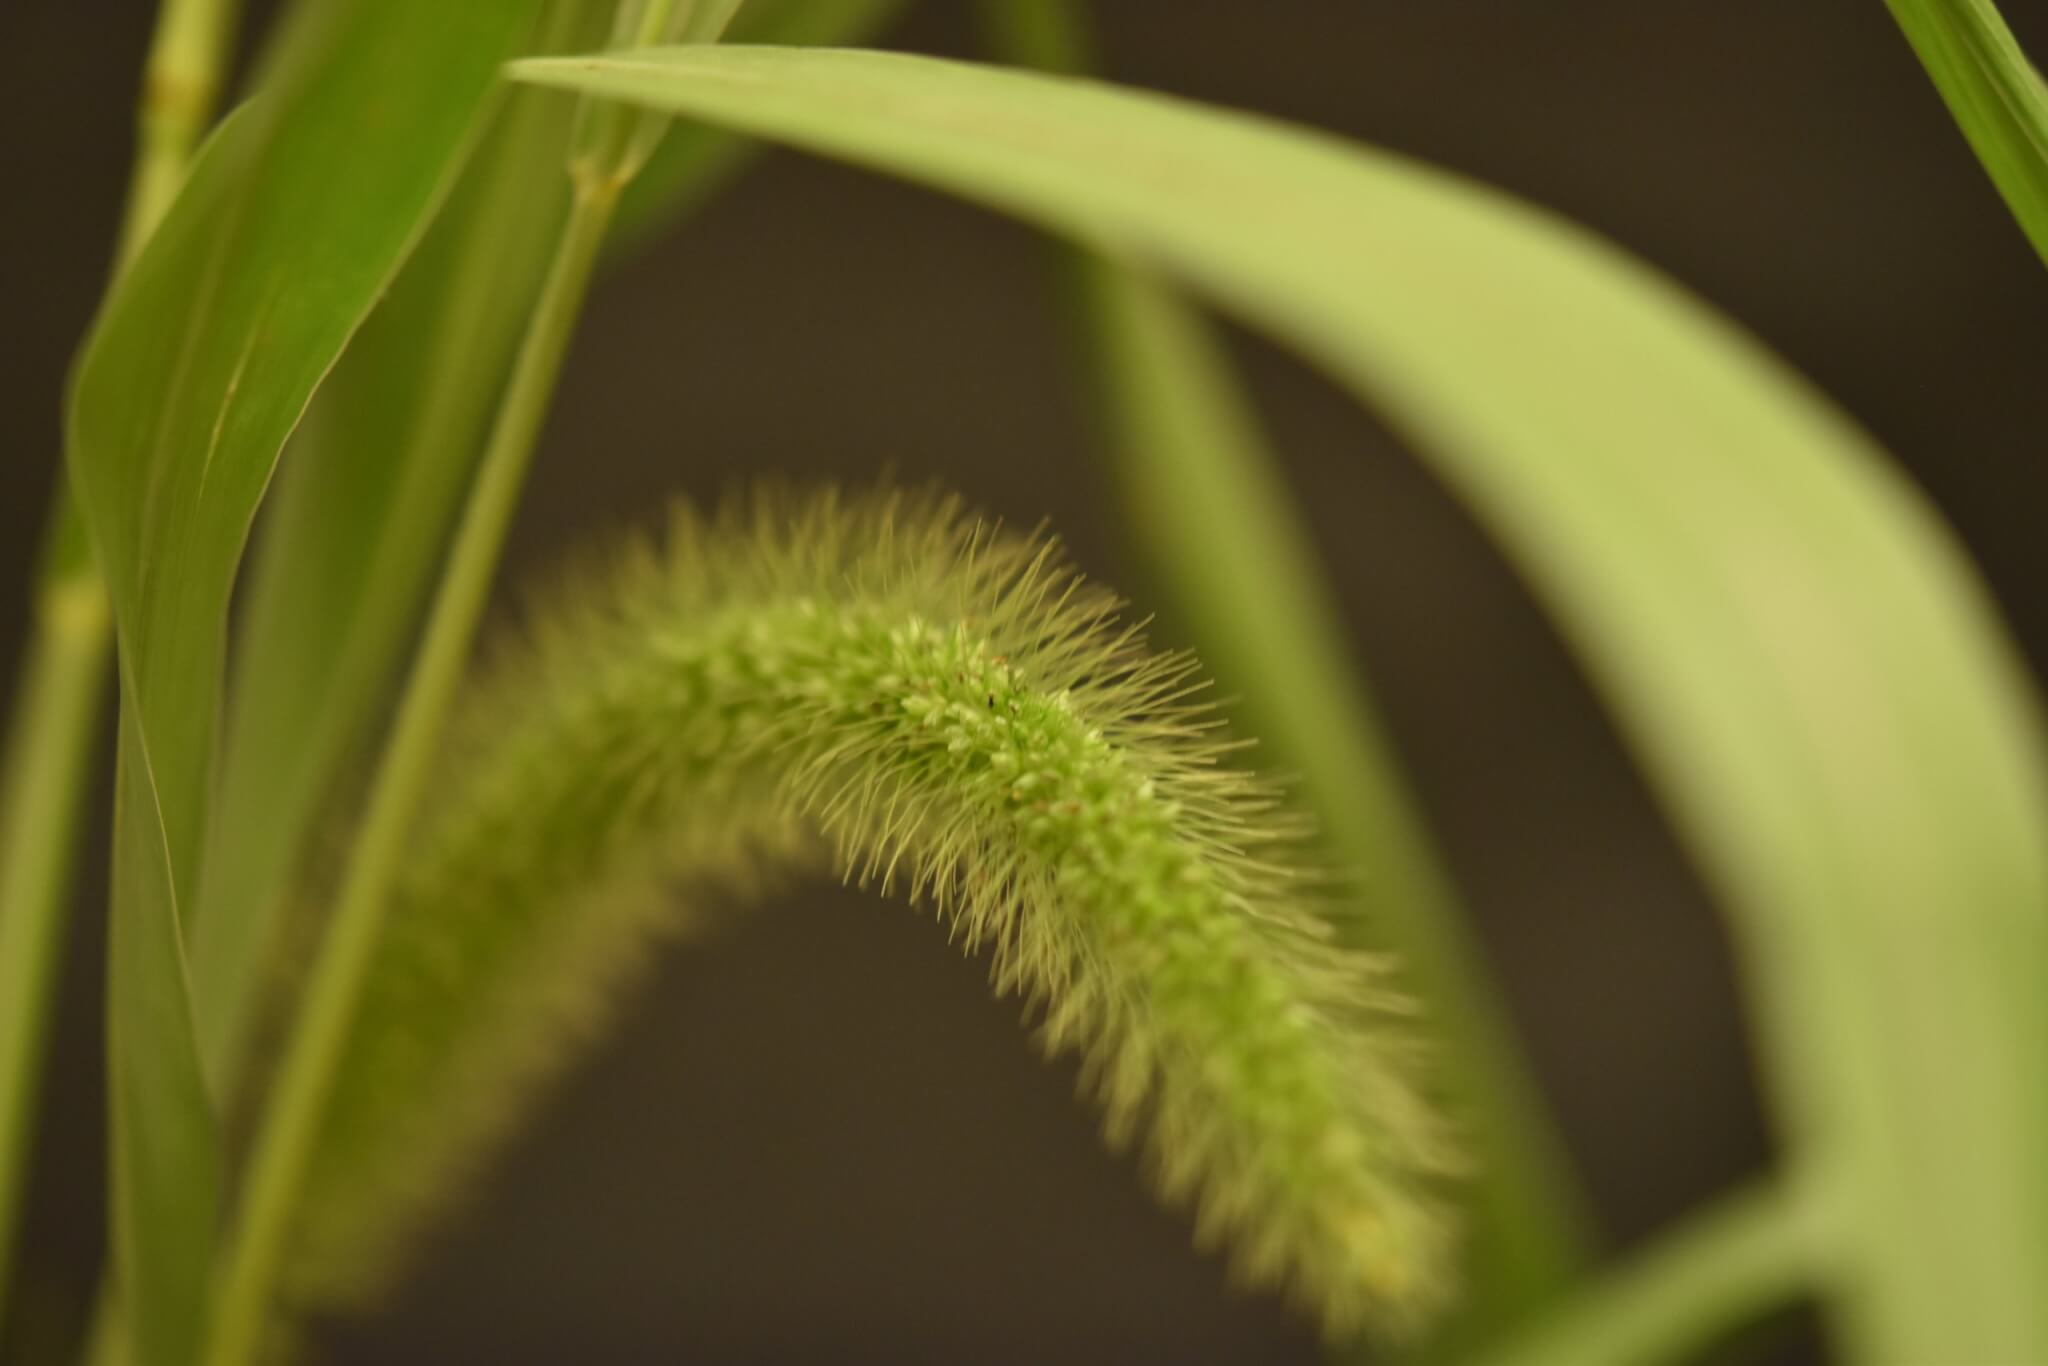 Giant foxtail panicle